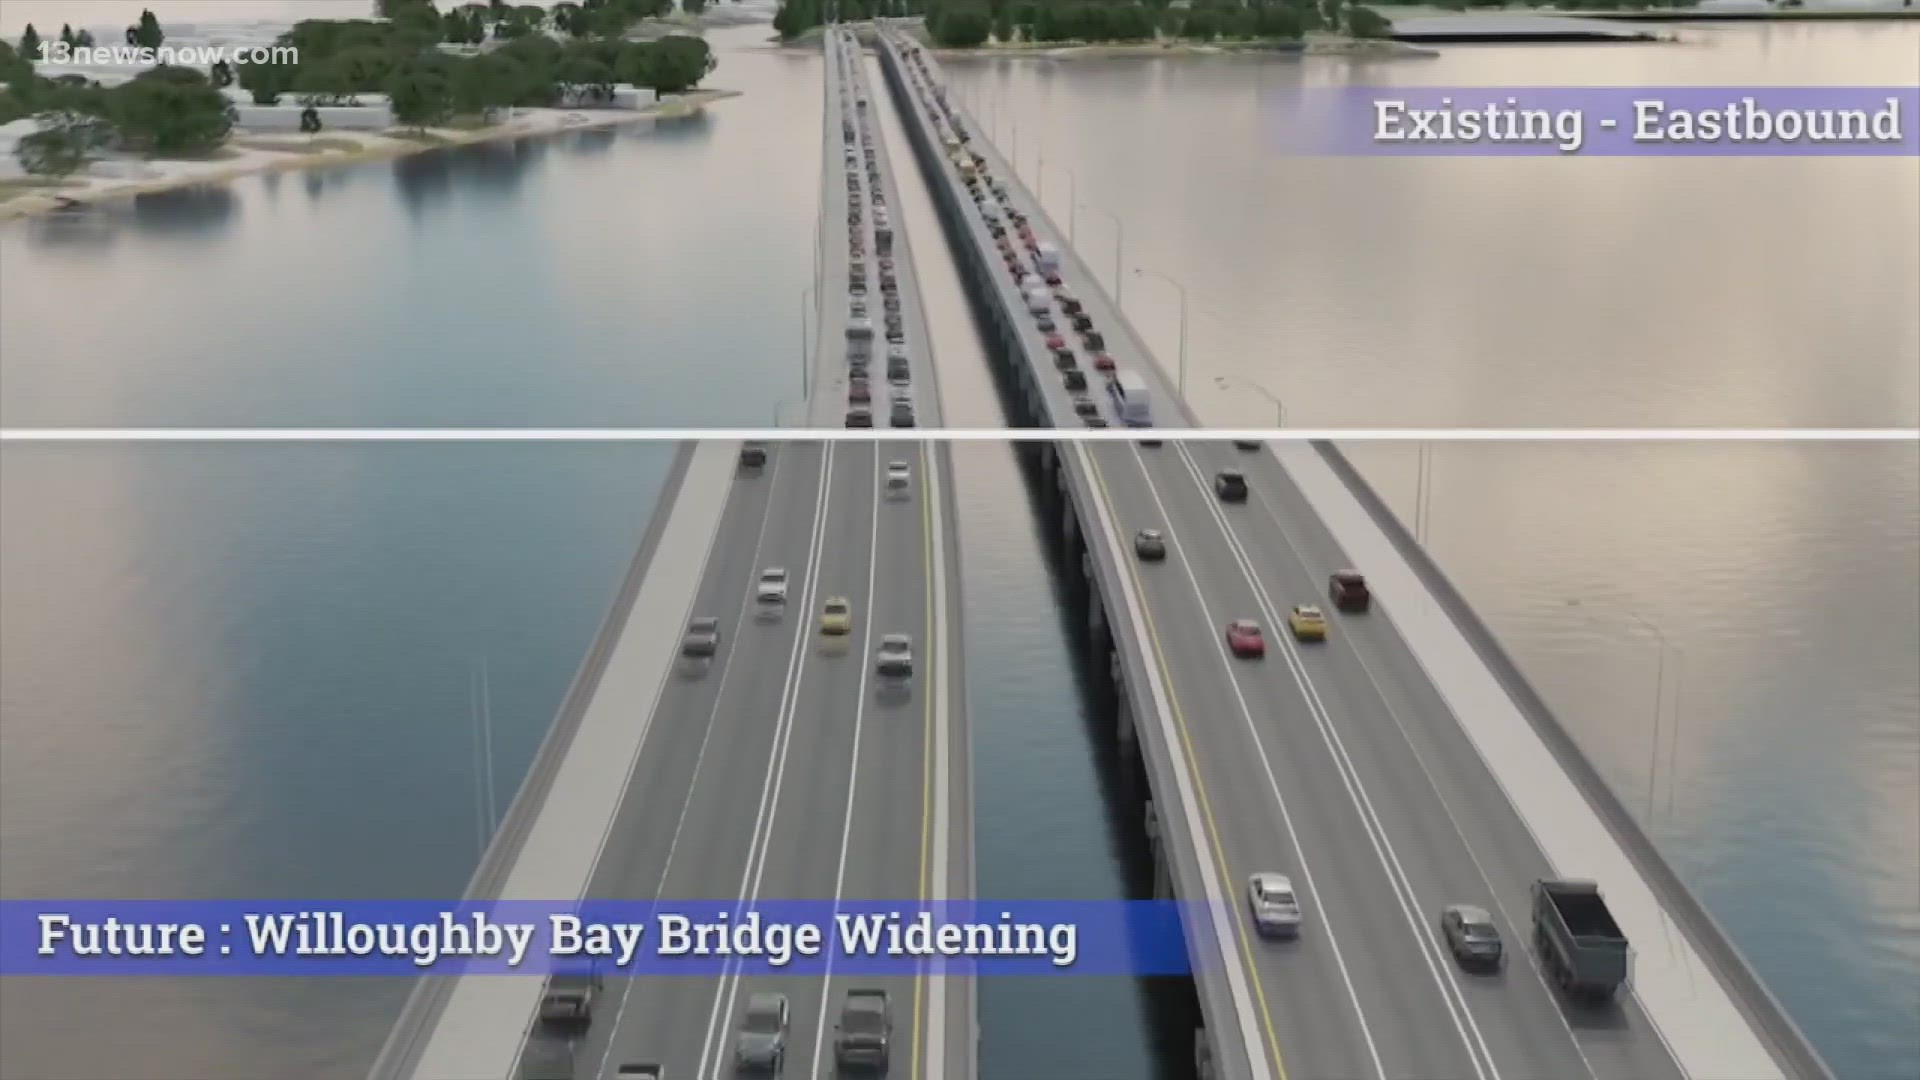 The goal of construction is to add two more lanes to both sides of the Hampton Roads Bridge-Tunnel. Work on the bridge will be Mon-Fri, 7 am - 8 pm. Sat 9 am - 8 pm.